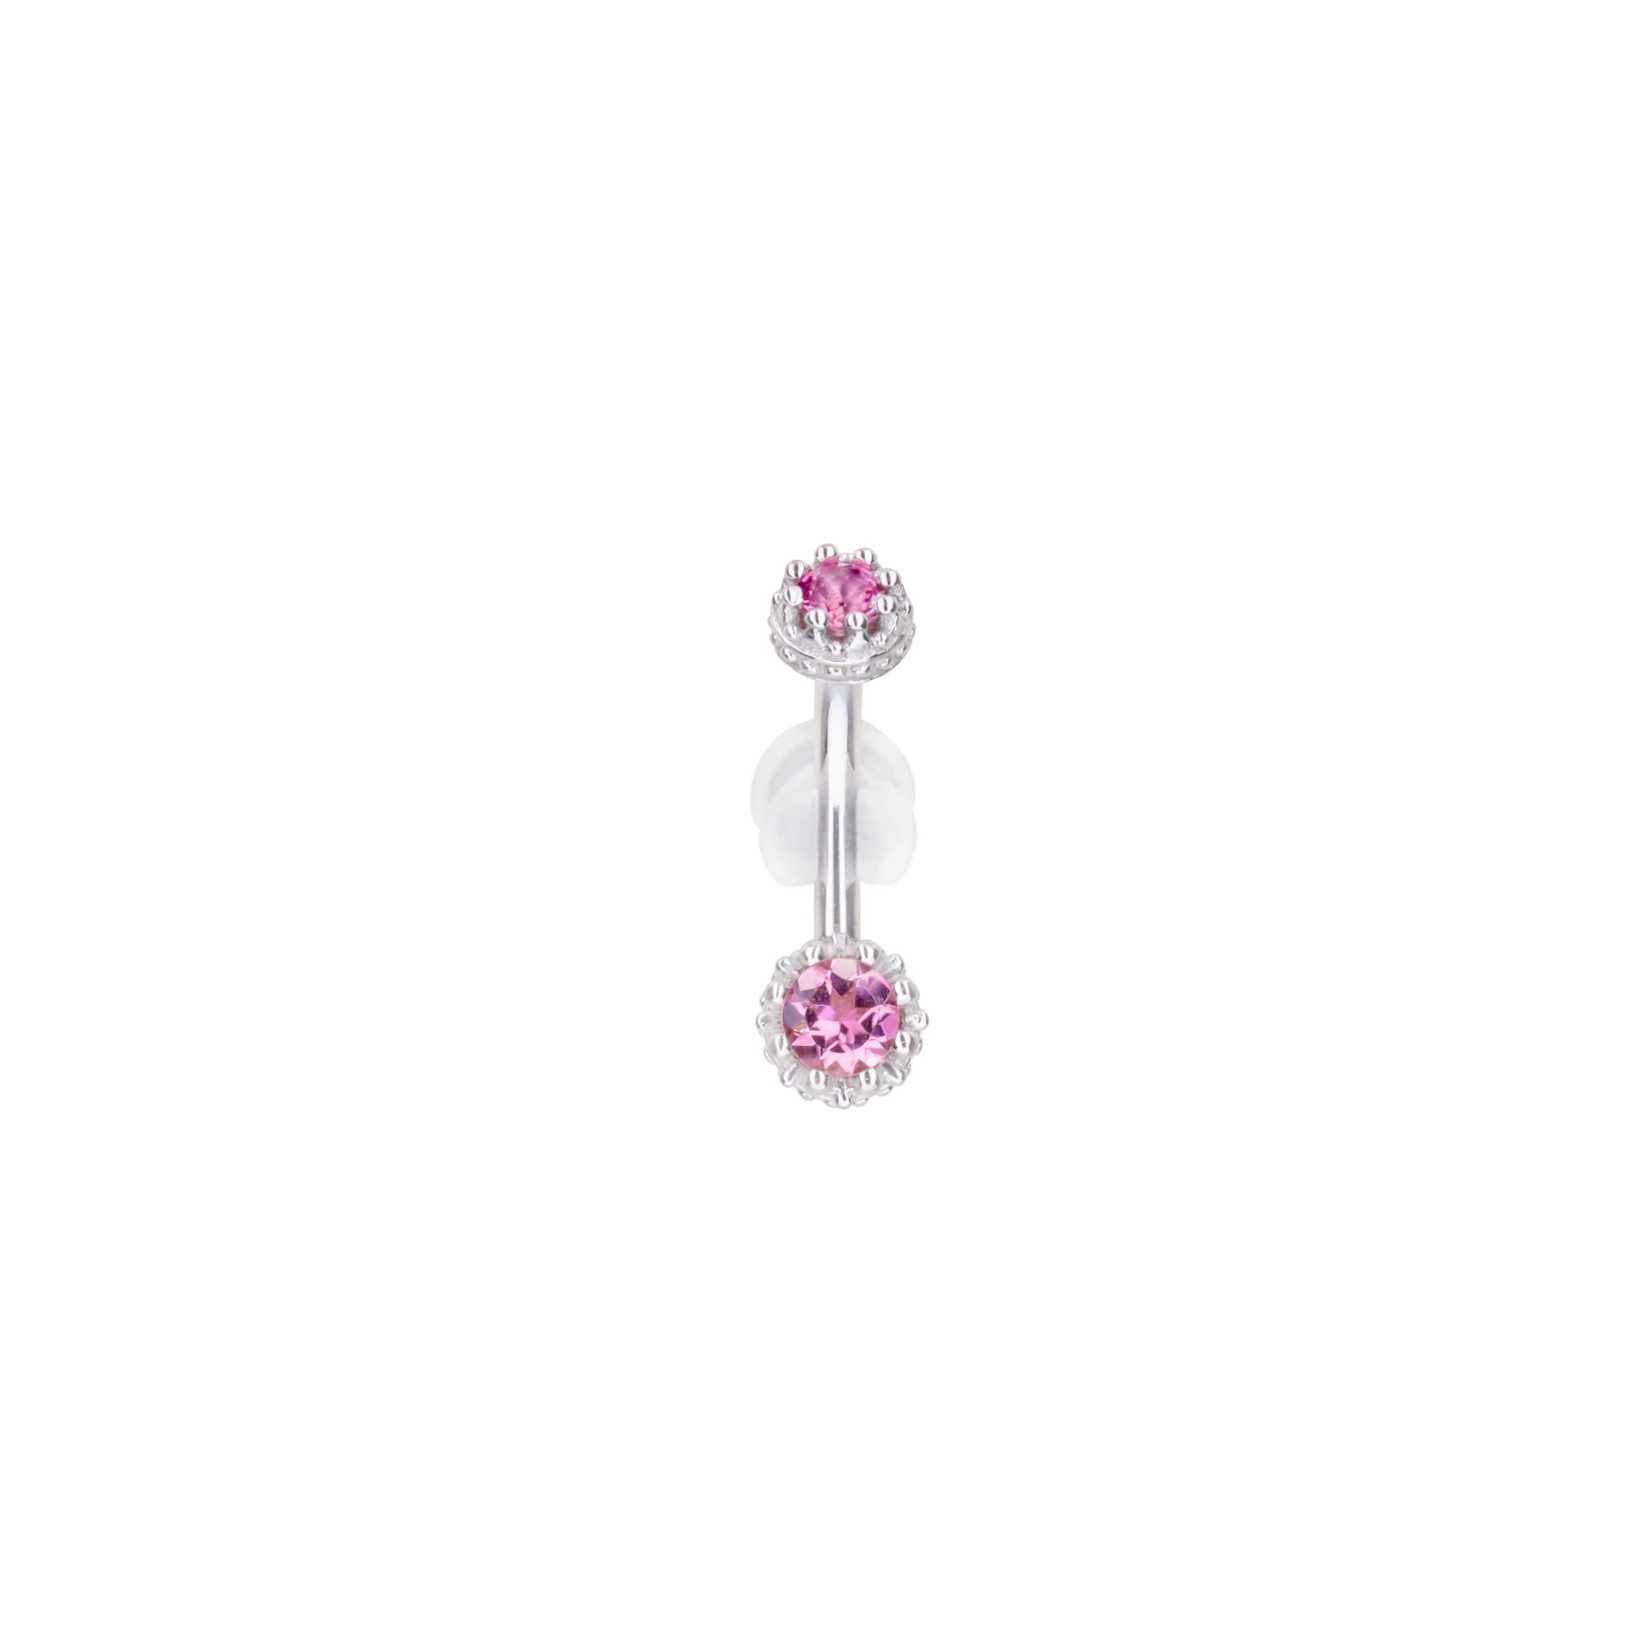 BVLA BVLA 14g 3/8 white gold "Crown Cabochon" navel curve with 3.0 & 4.0 pink tourmaline